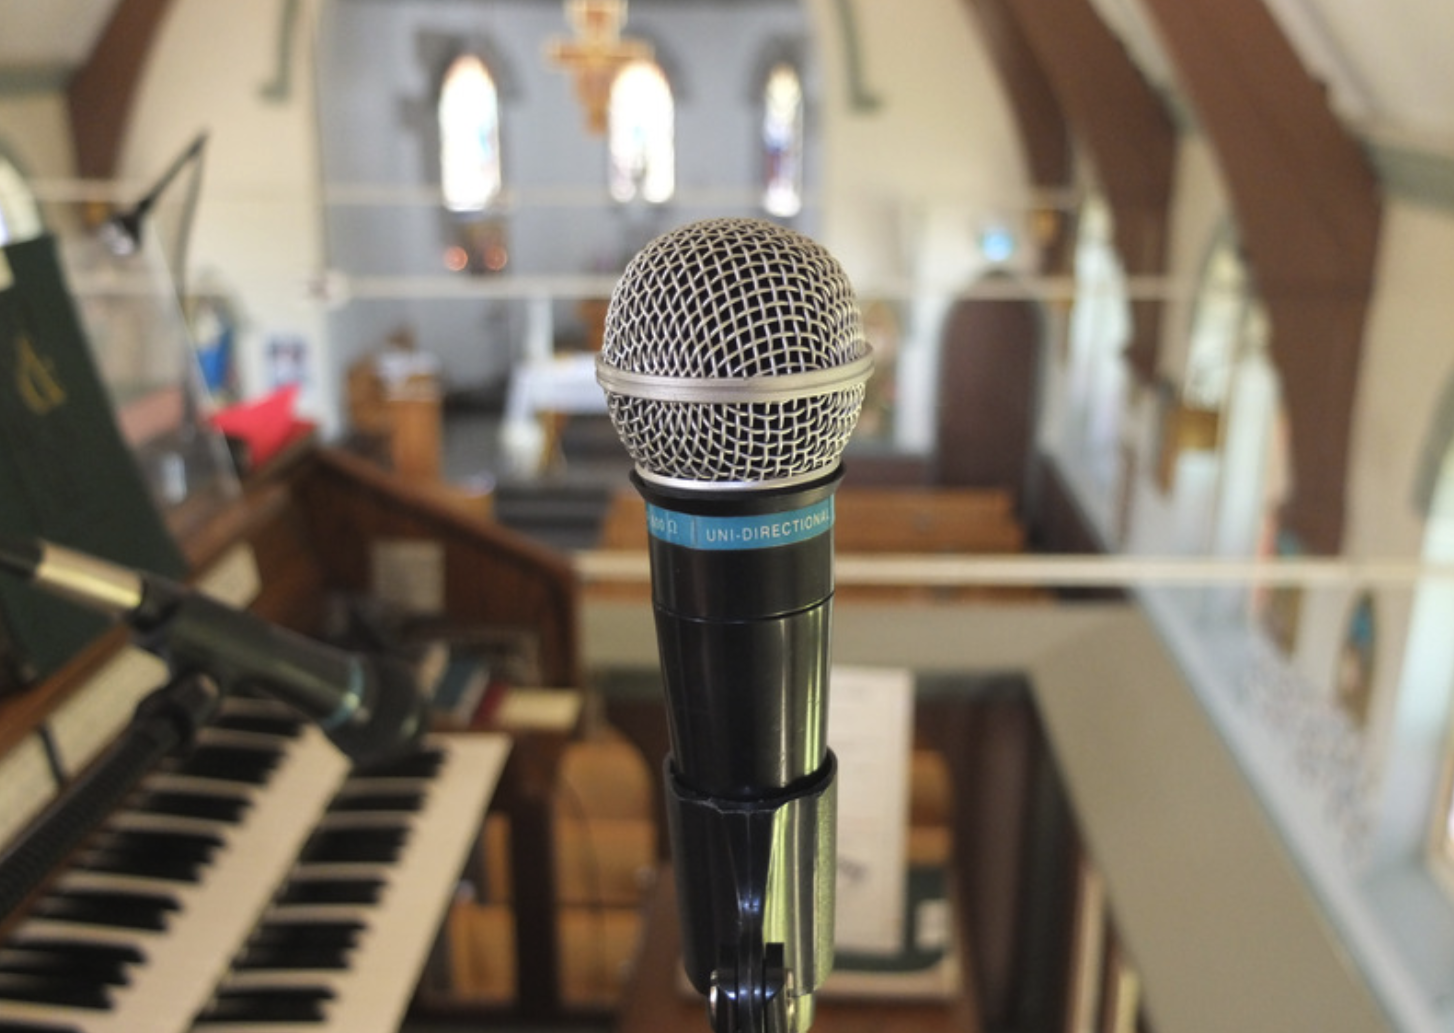 Image of Oregon with a microphone added centre. Choir loft